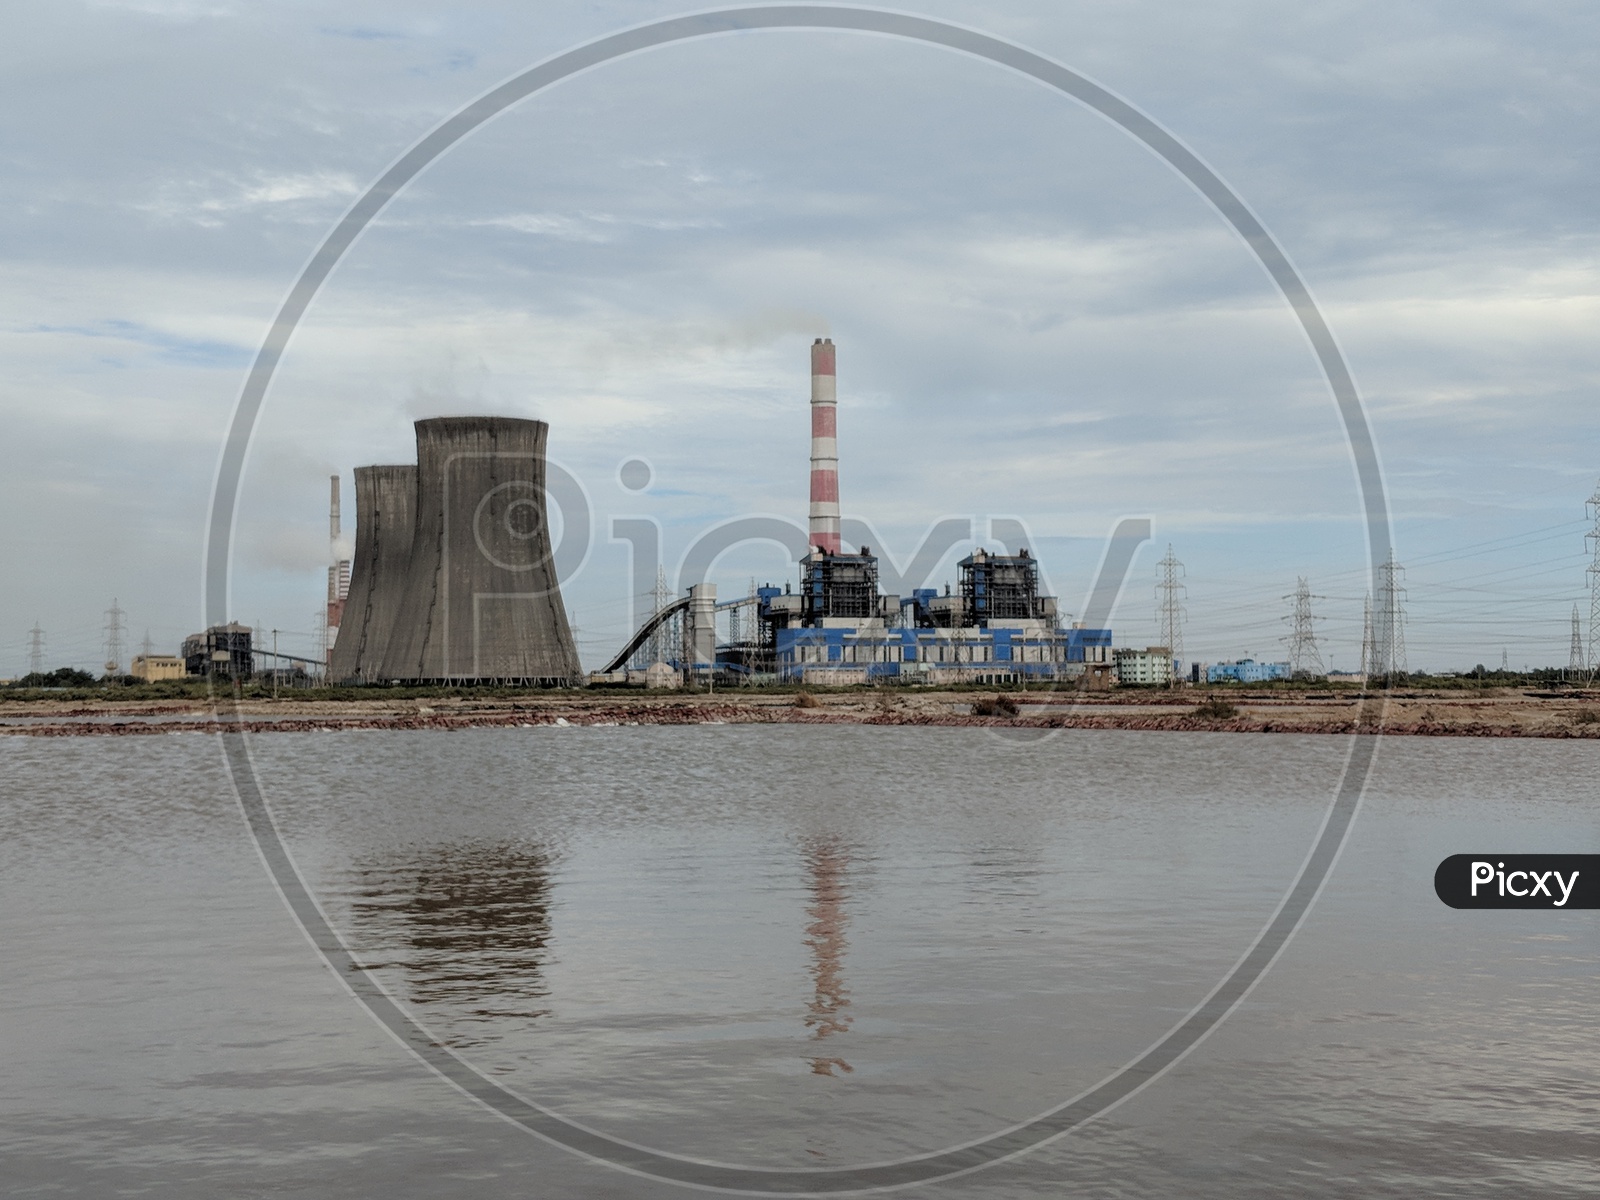 Thermal Power Generation